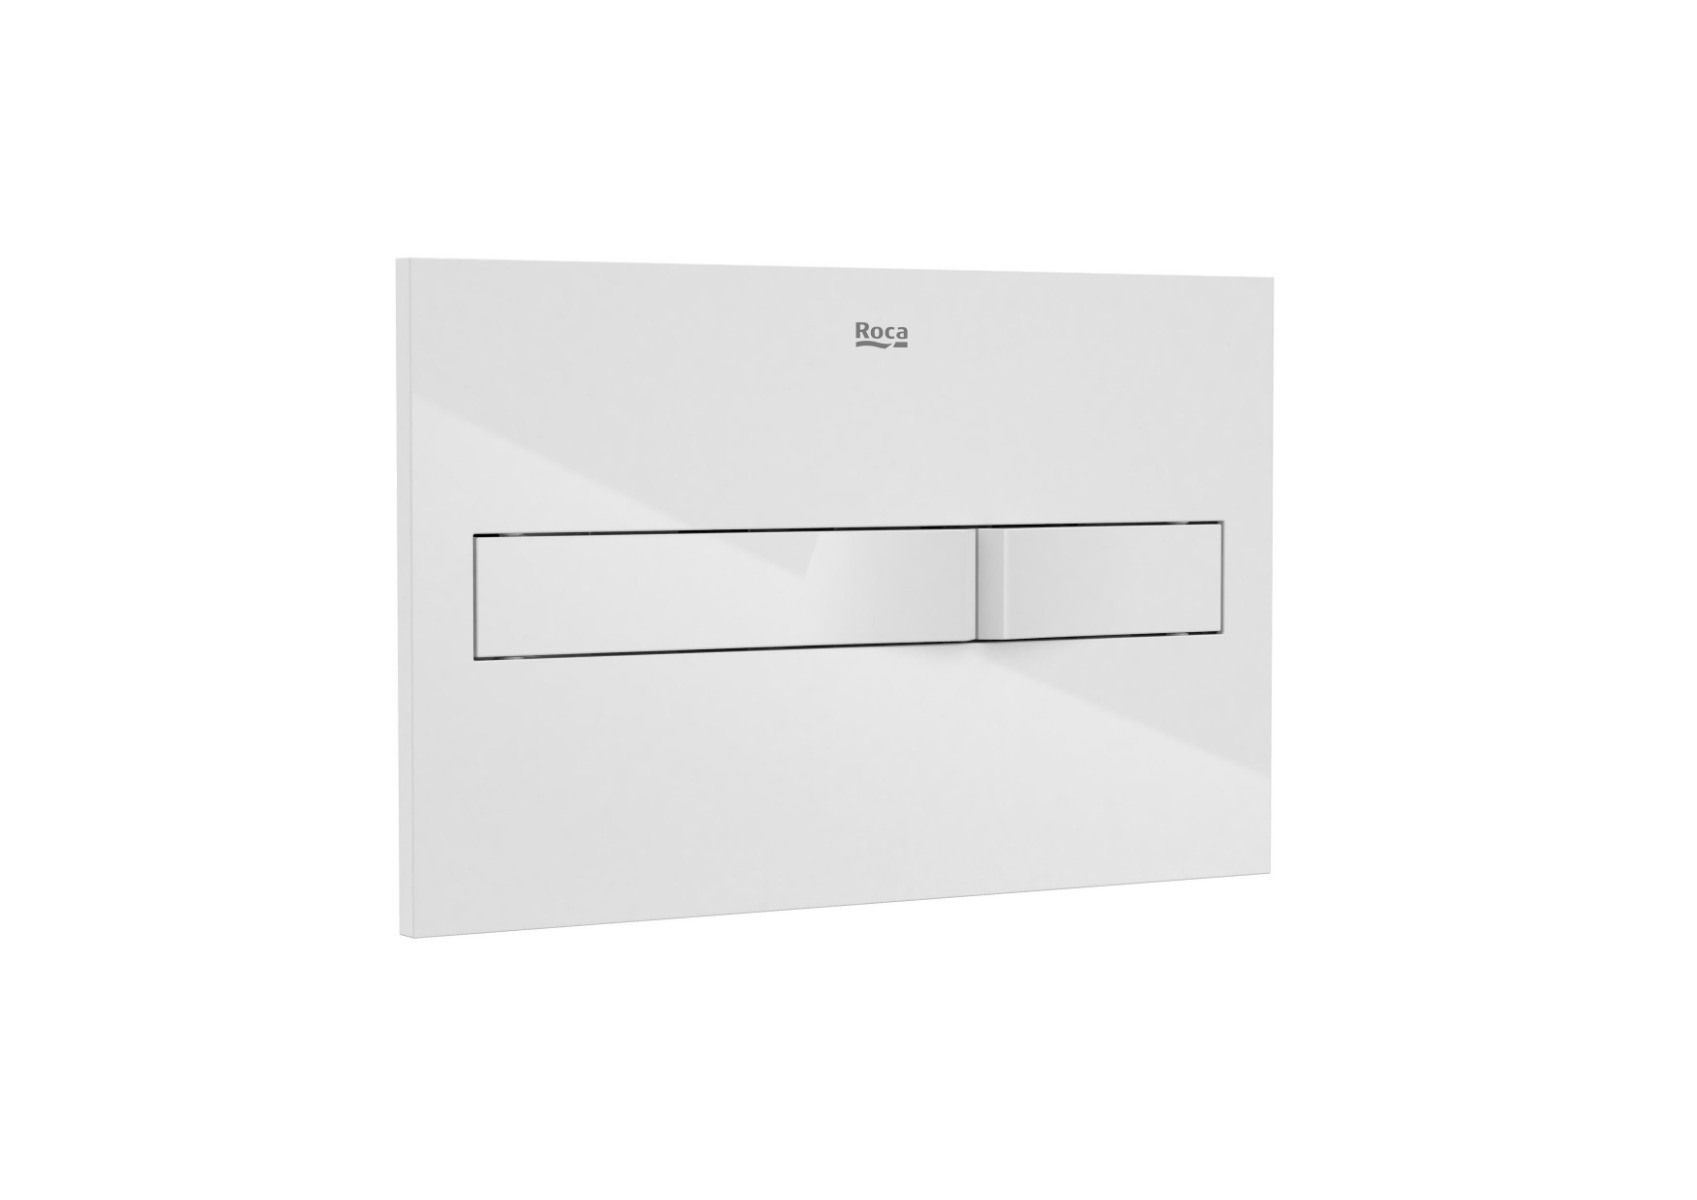 PL2 DUAL - Dual flush operating plate for concealed cistern